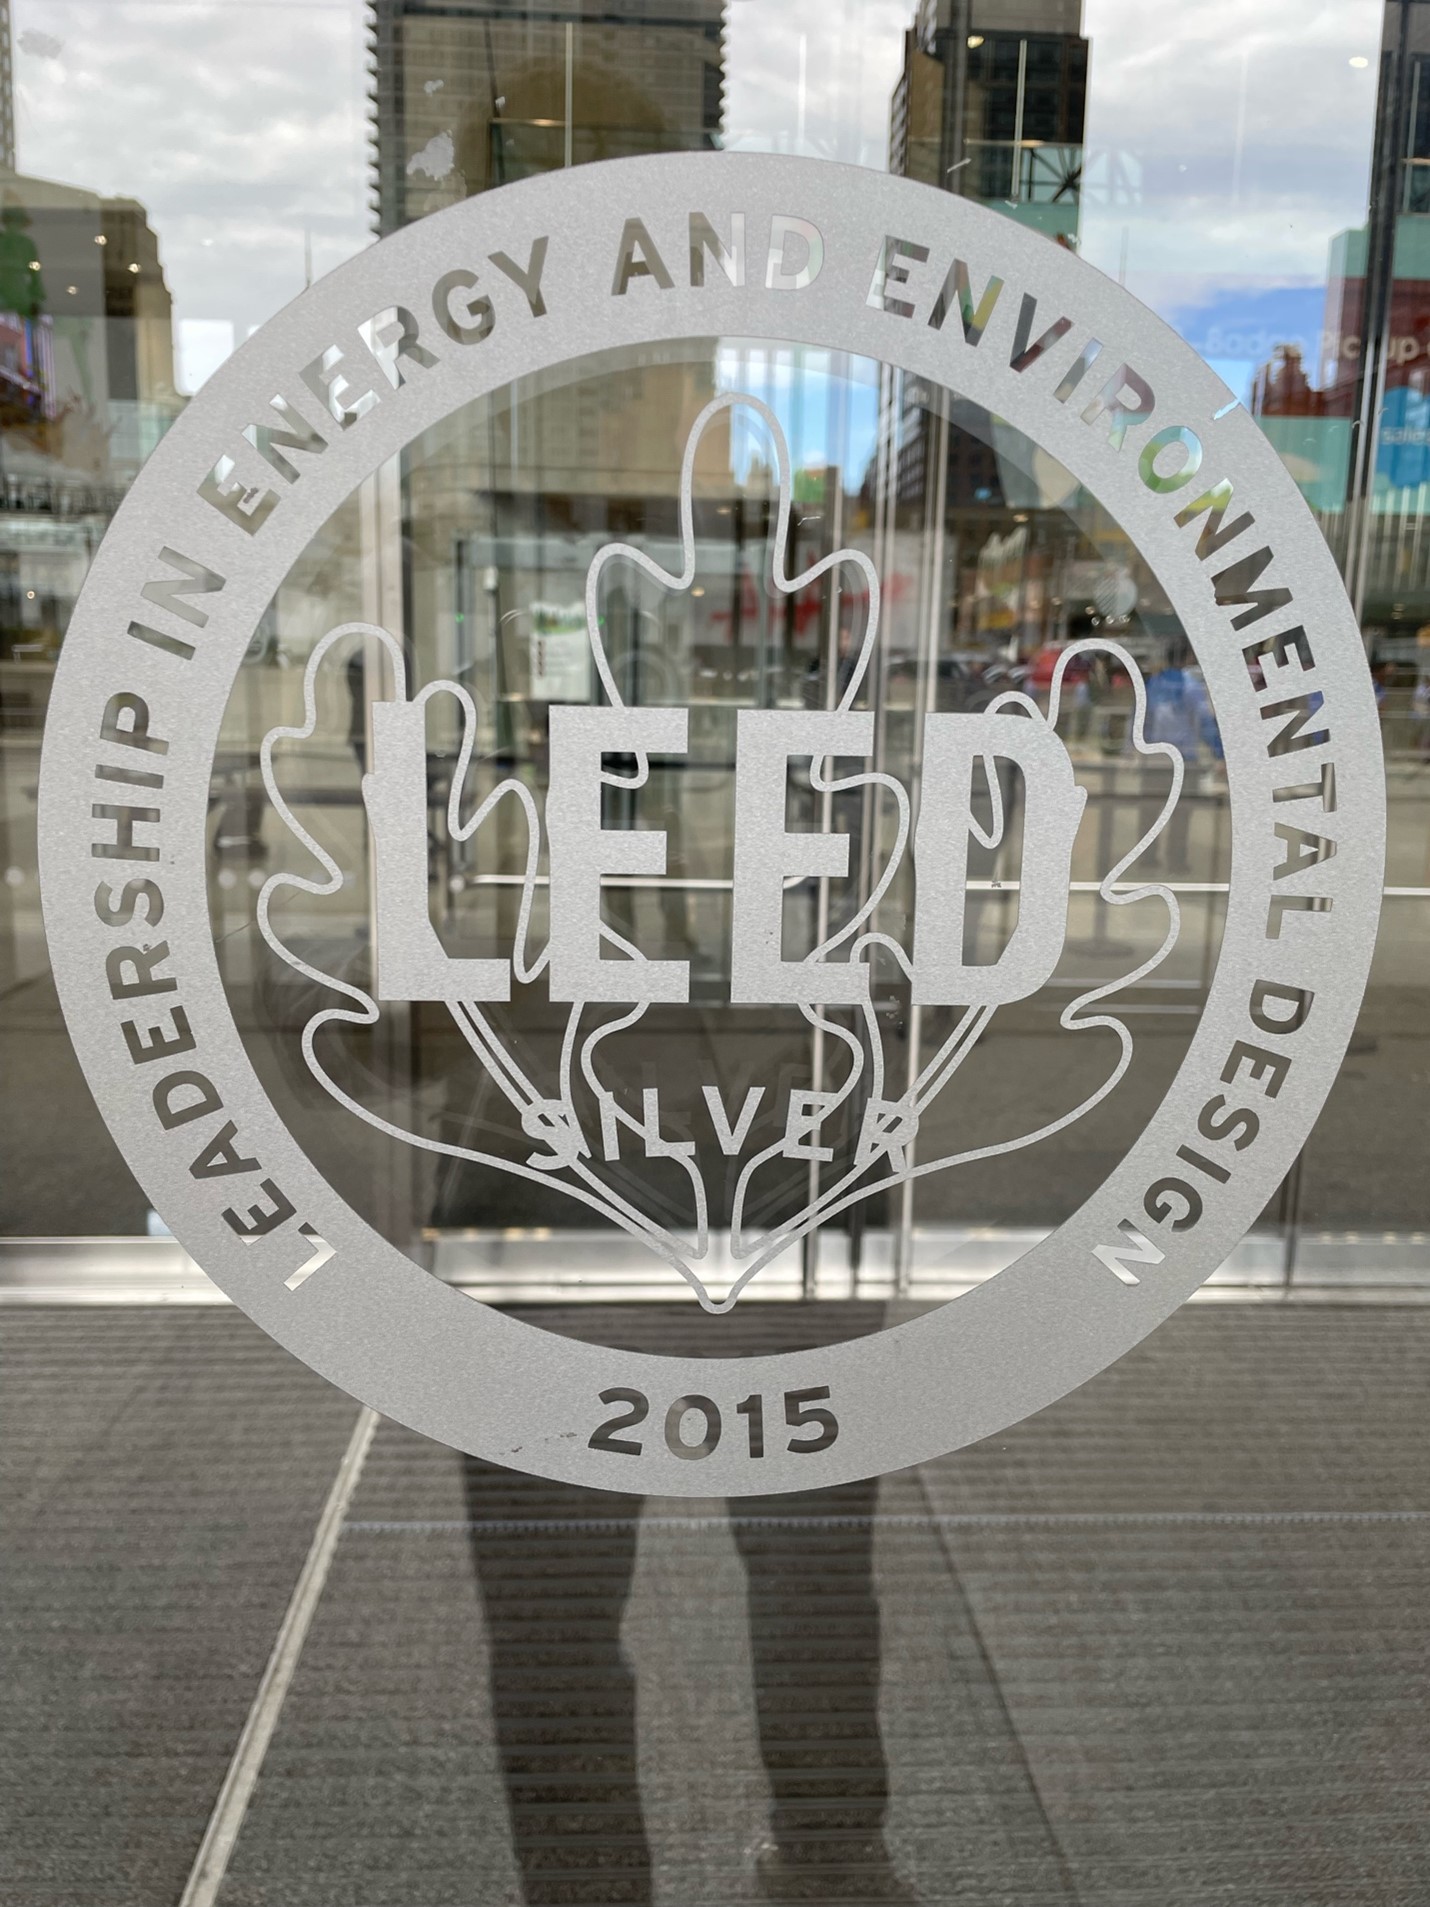 The LEED certification seal